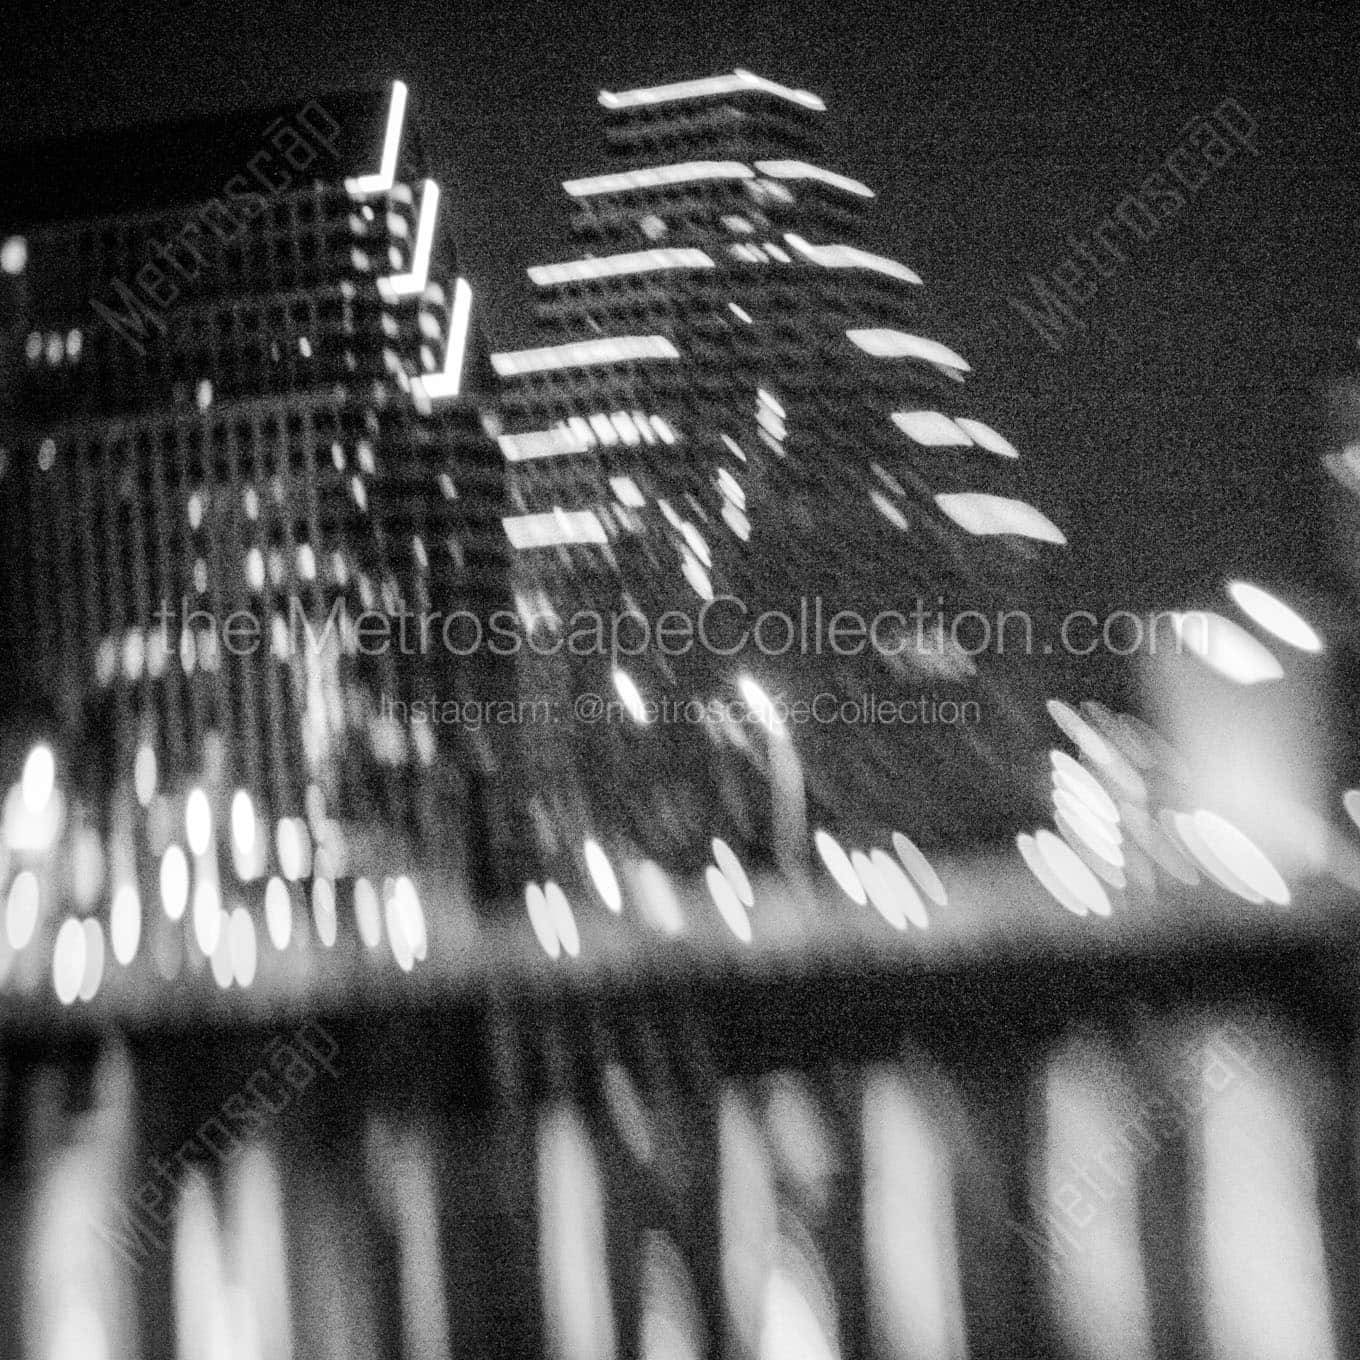 blurry picture one congress plaza building Black & White Wall Art